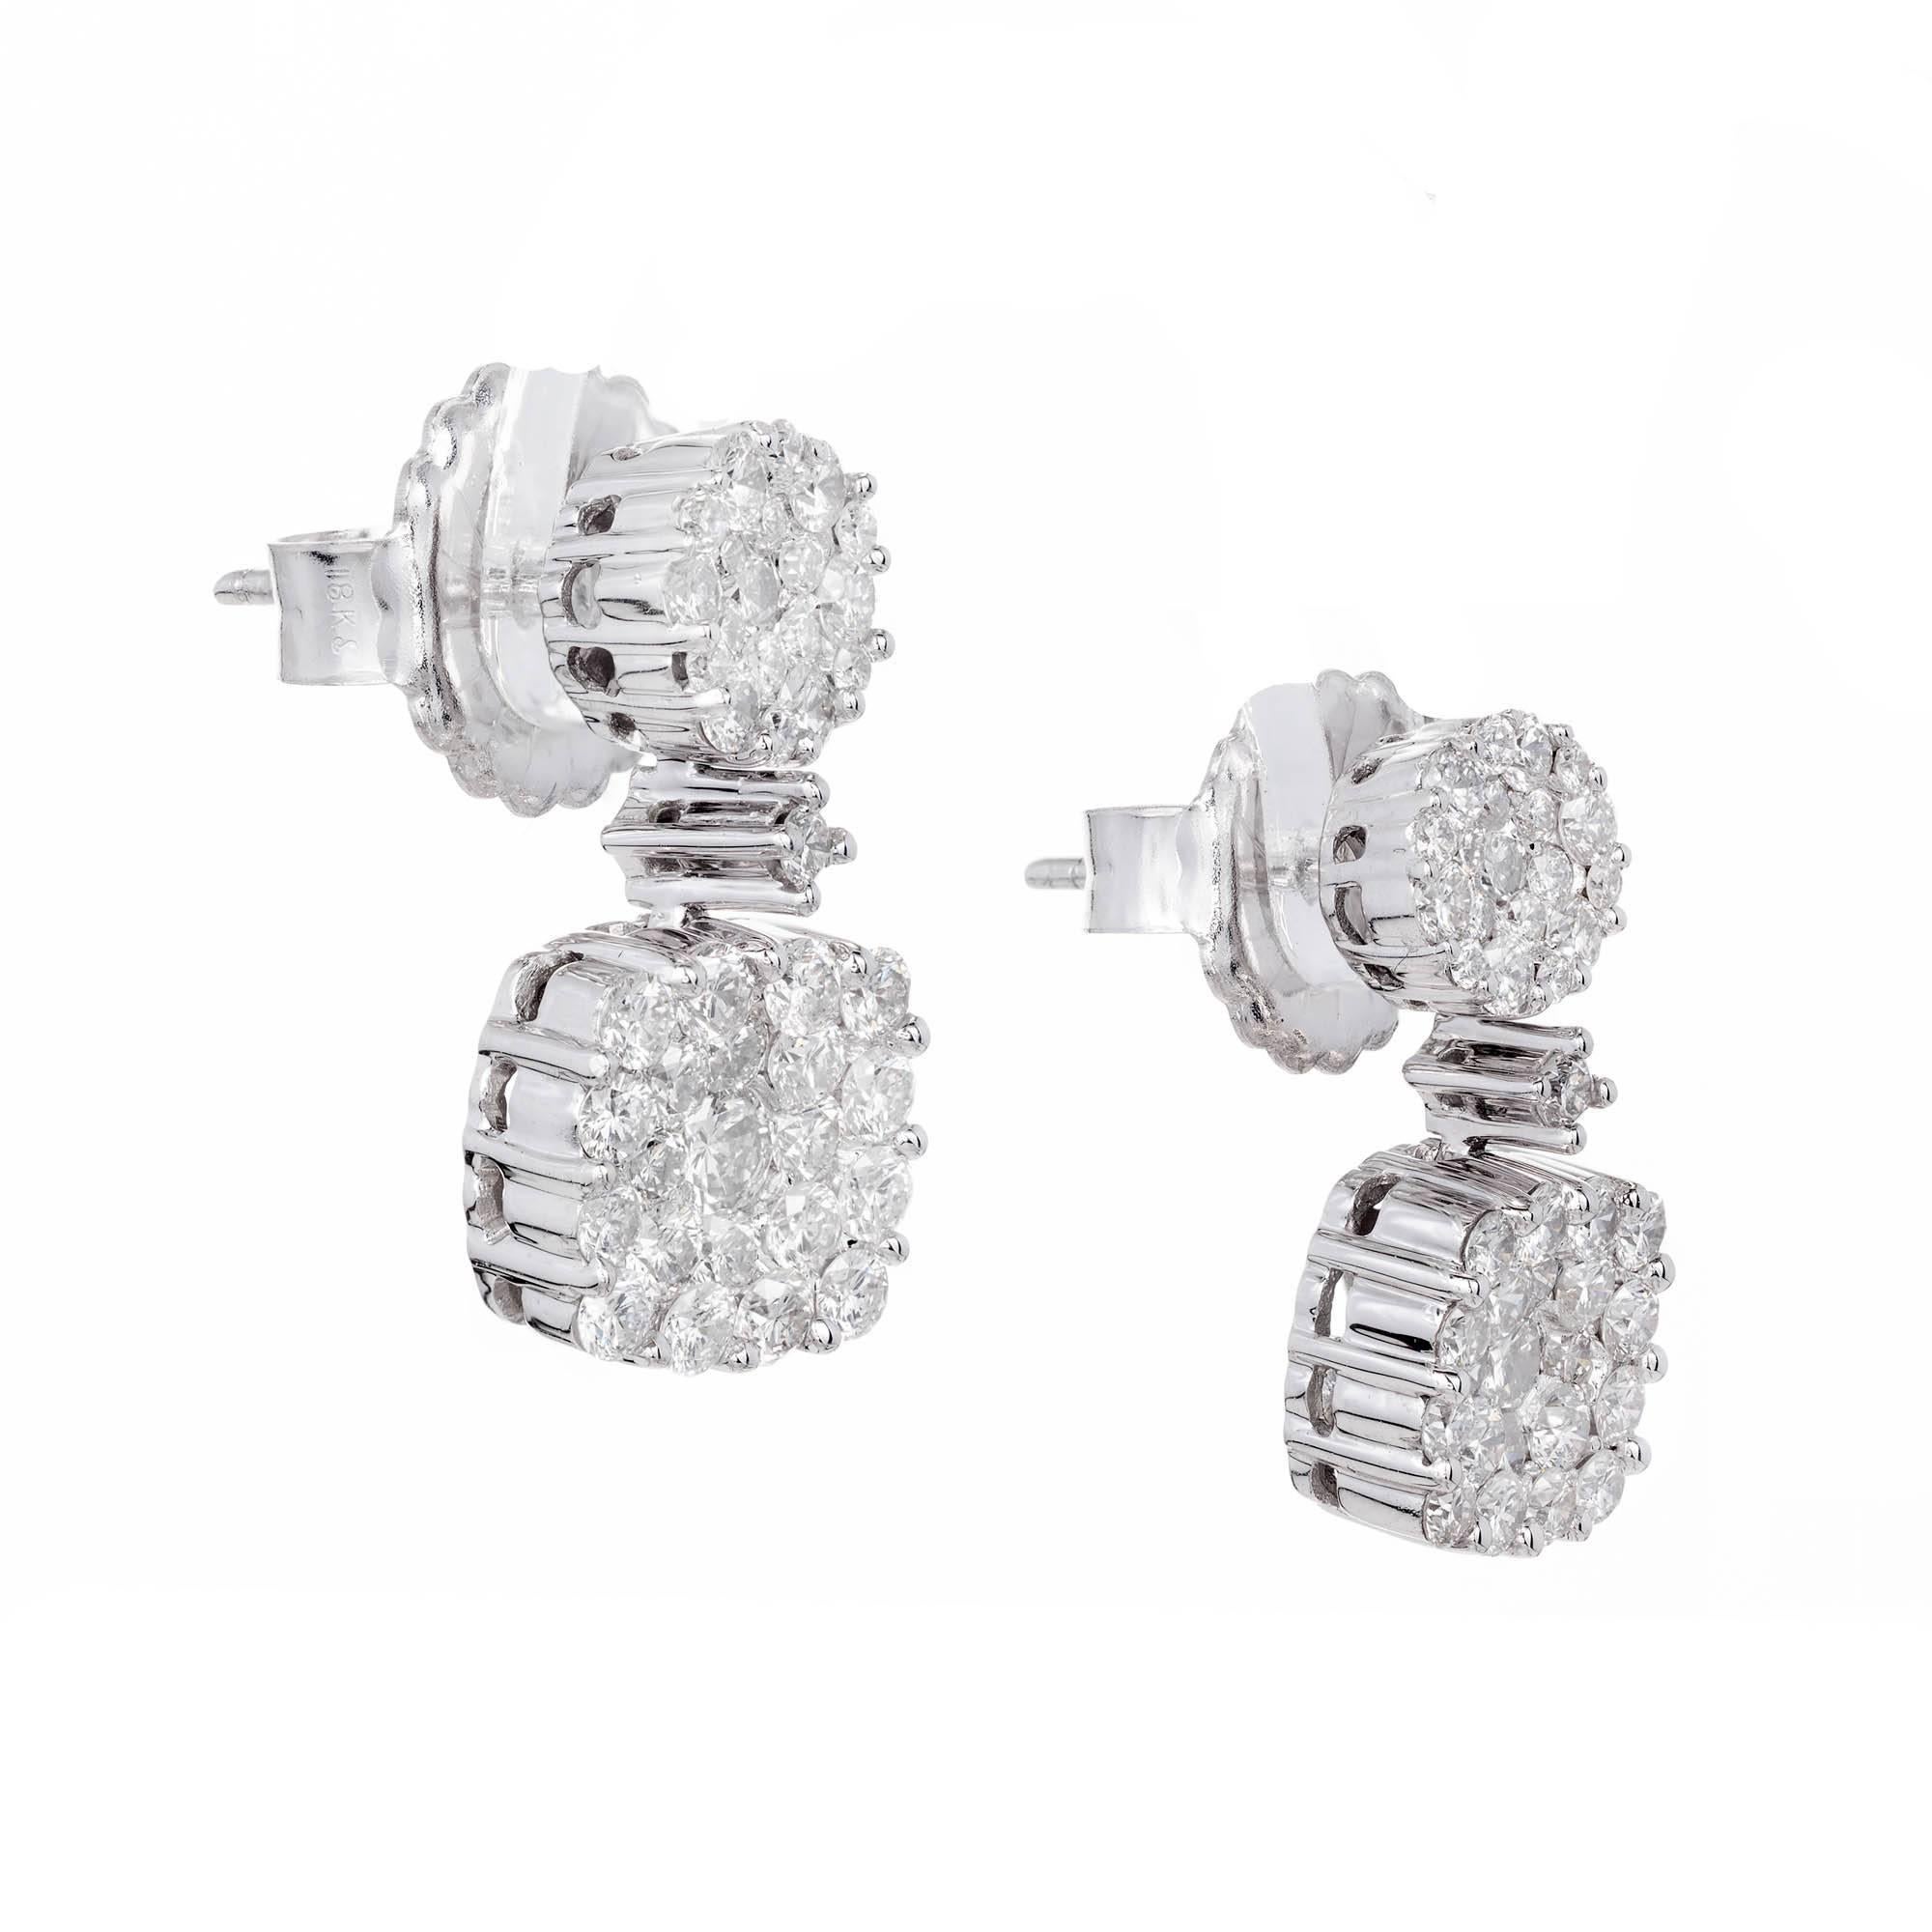 18k white gold Diamond cluster dangle earrings with bright white full cut Diamonds.

80 round full cut Diamonds, approx. total weight 1.50cts, H, SI1
18k white gold 
5.9 grams
Tested and stamped: 18k
Top to bottom: 18.74mm or .74 inch
Width: 9.37mm